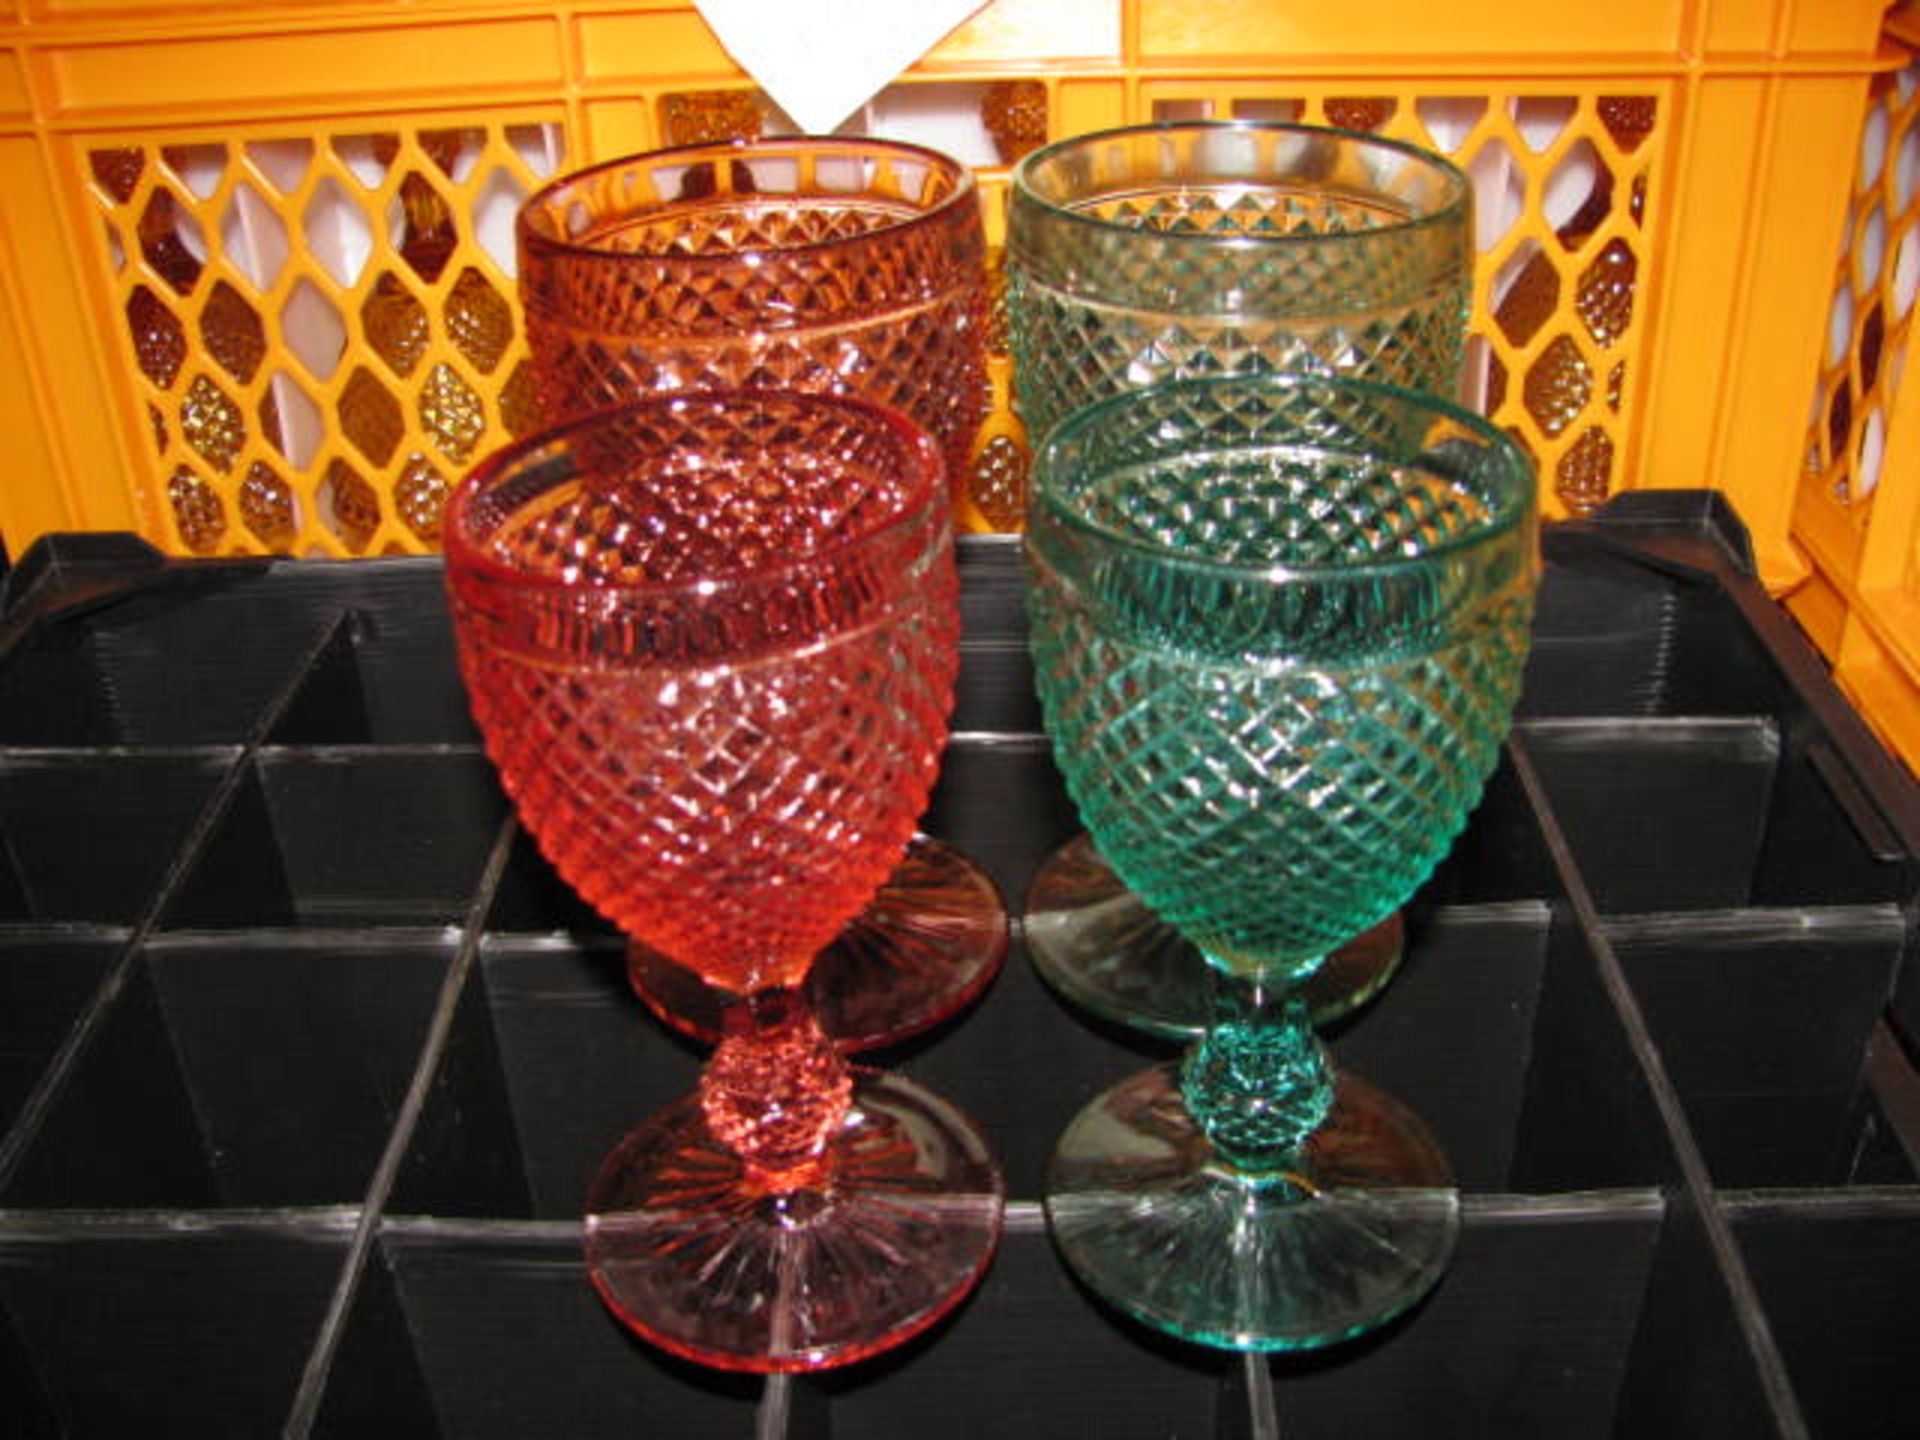 Quantity of various style crockery, glassware and accessories